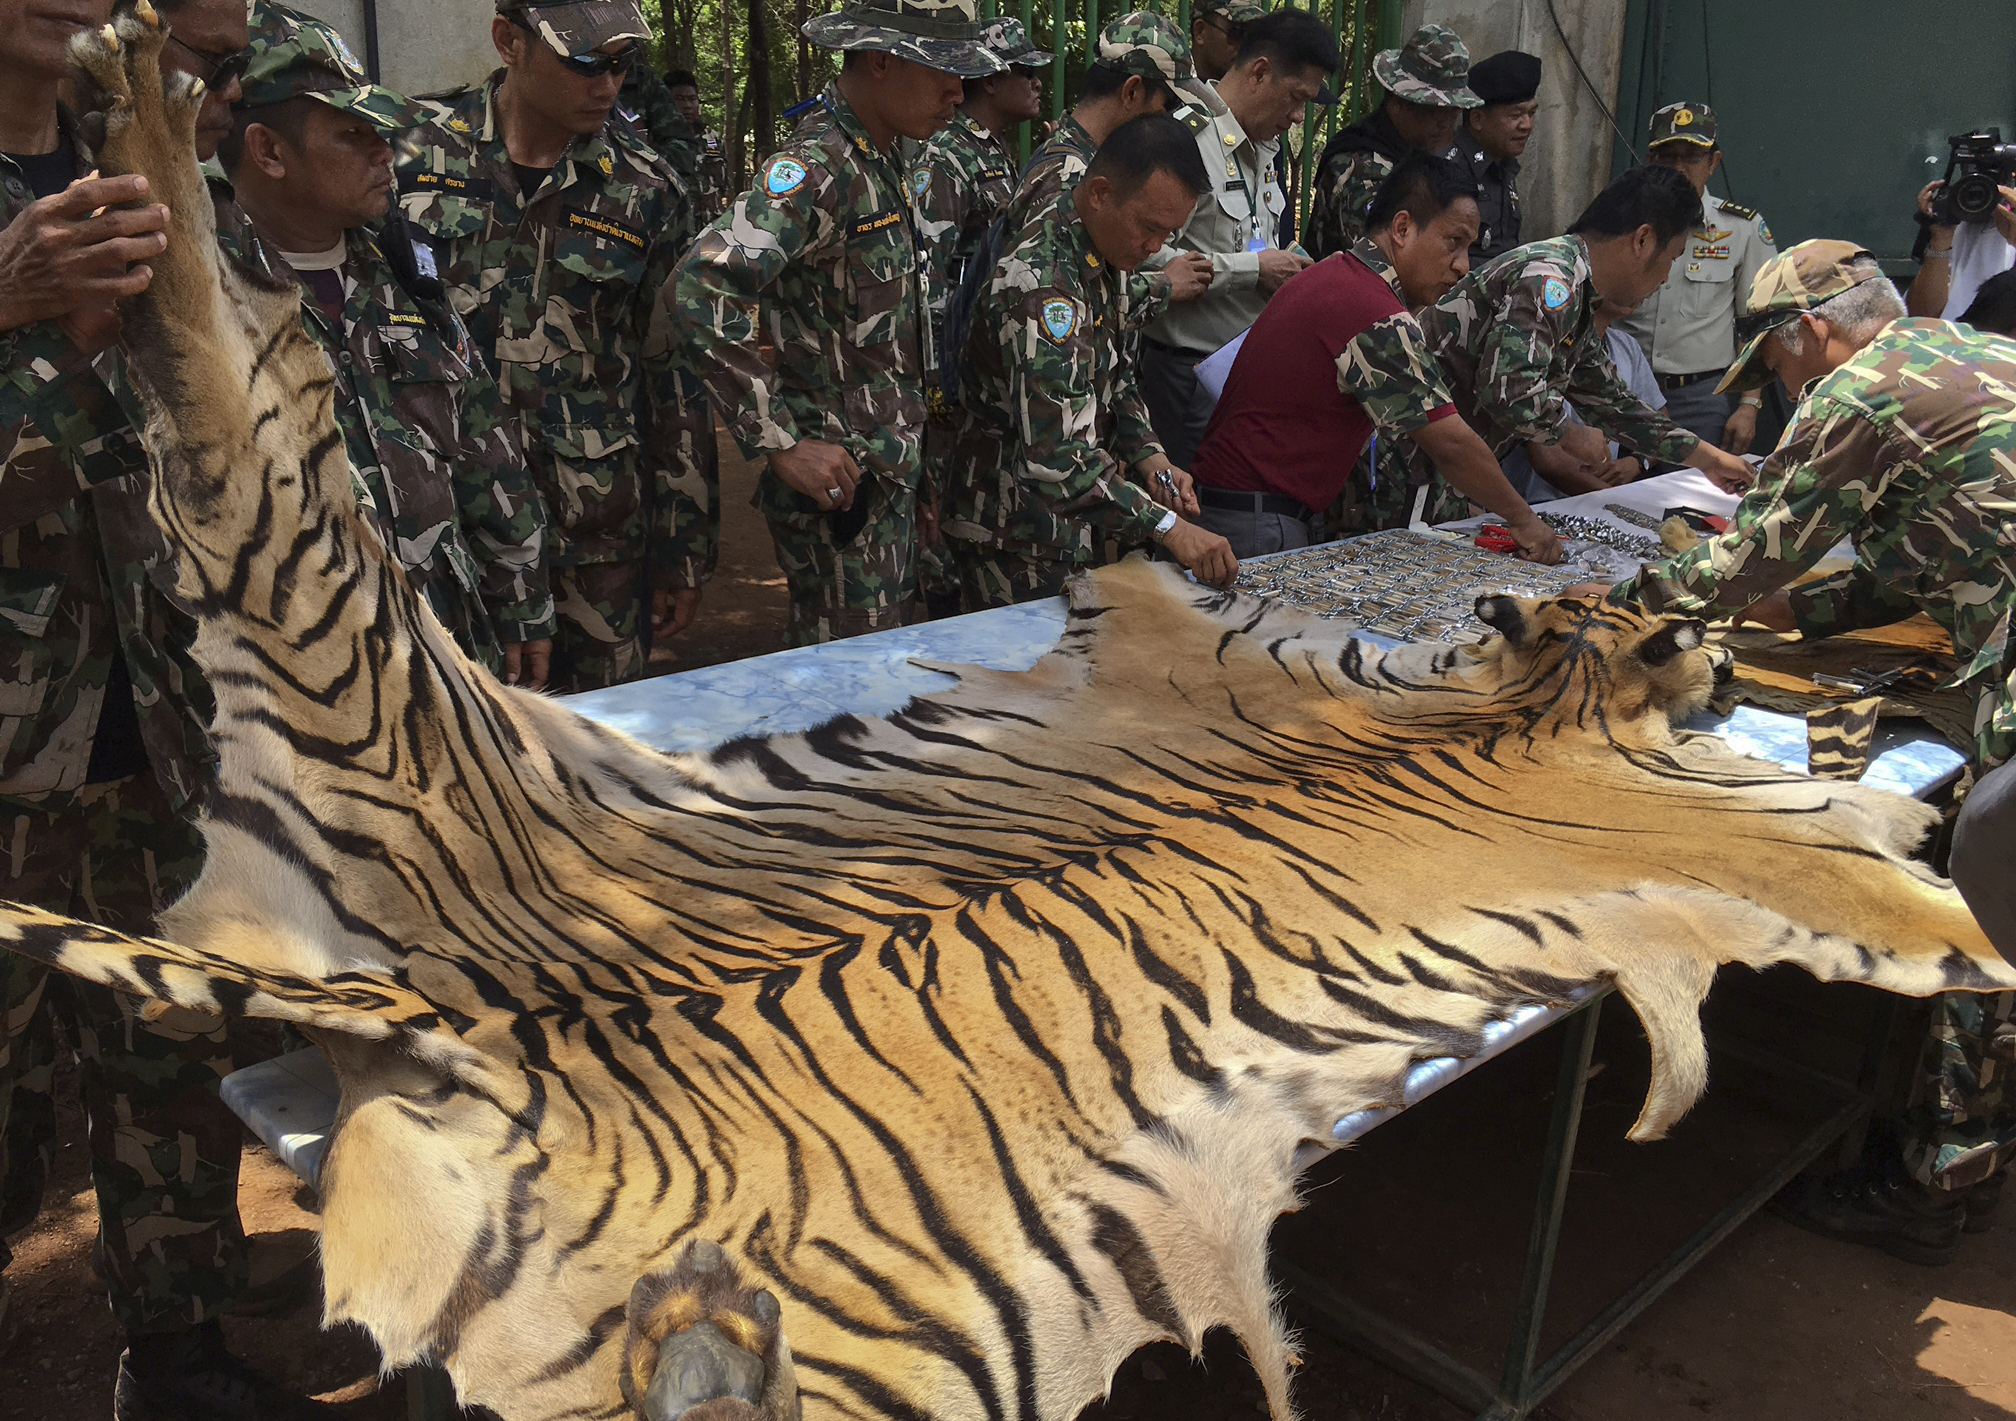 National Parks and Wildlife officers examine the skin of a tiger at the "Tiger Temple," in Saiyok district in Kanchanaburi province, west of Bangkok, Thailand,  June 2, 2016. (AP)